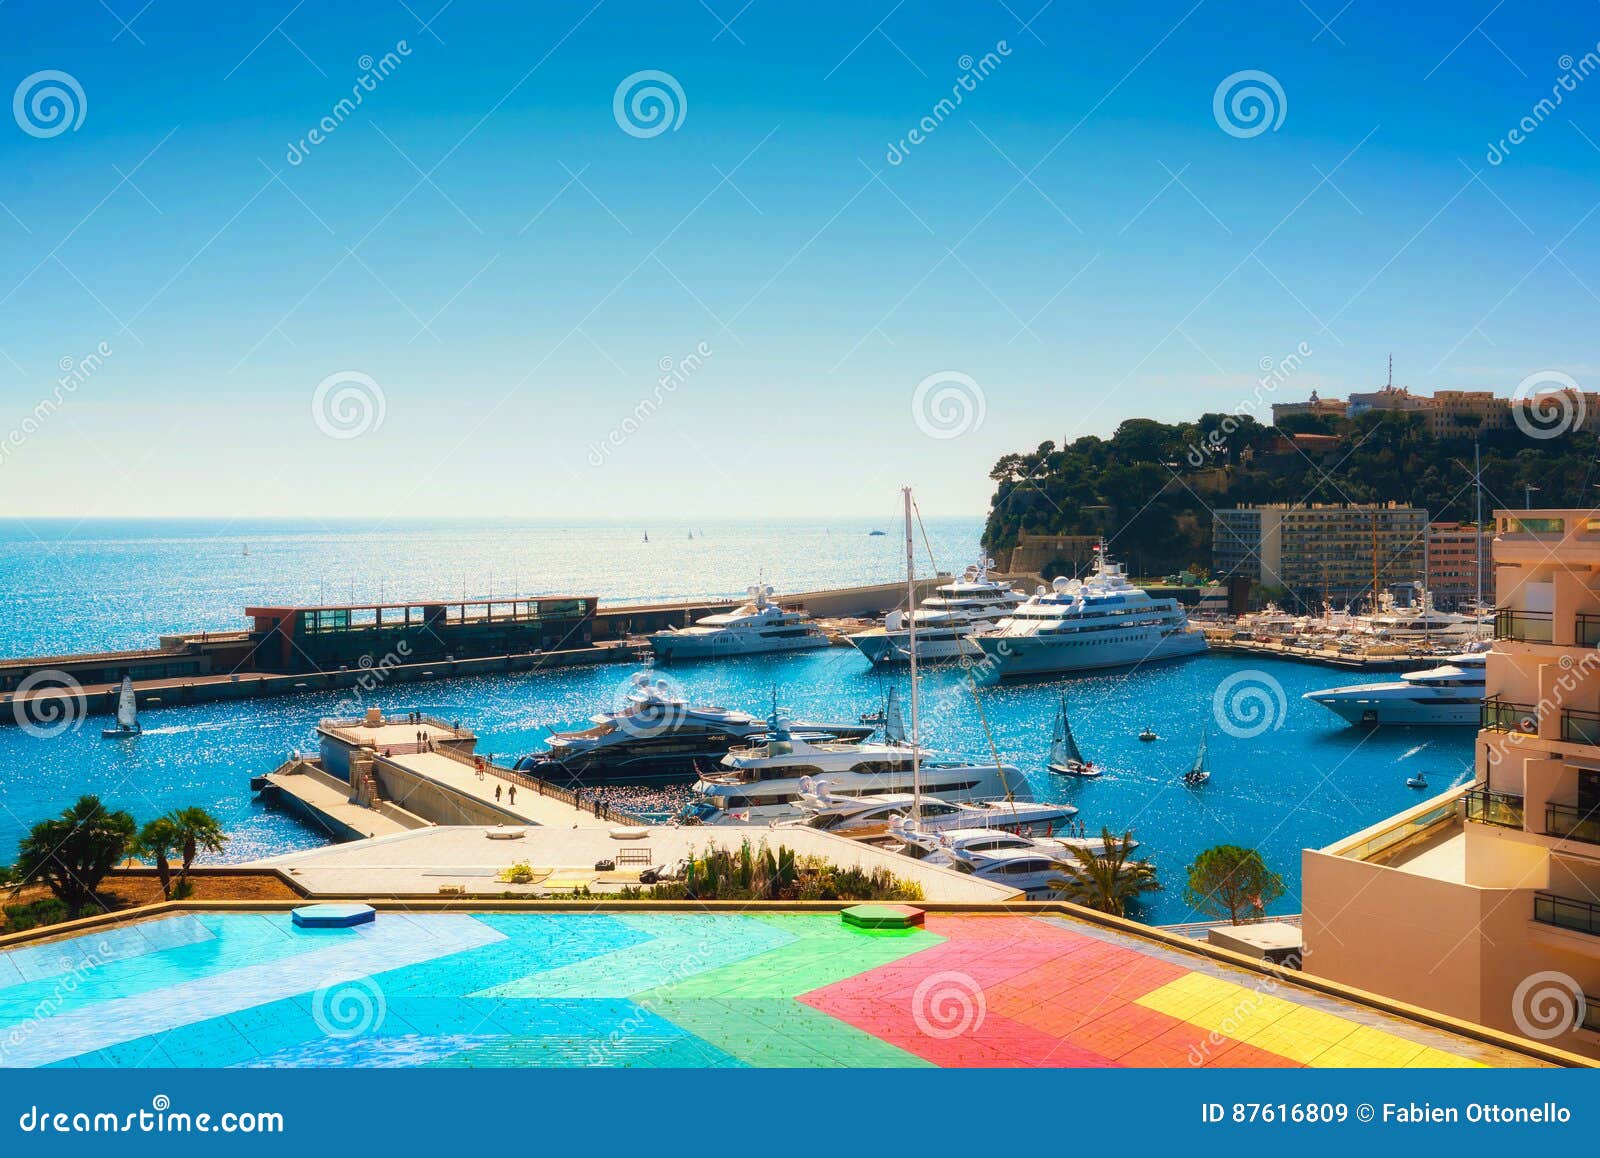 the harbour in monte carlo